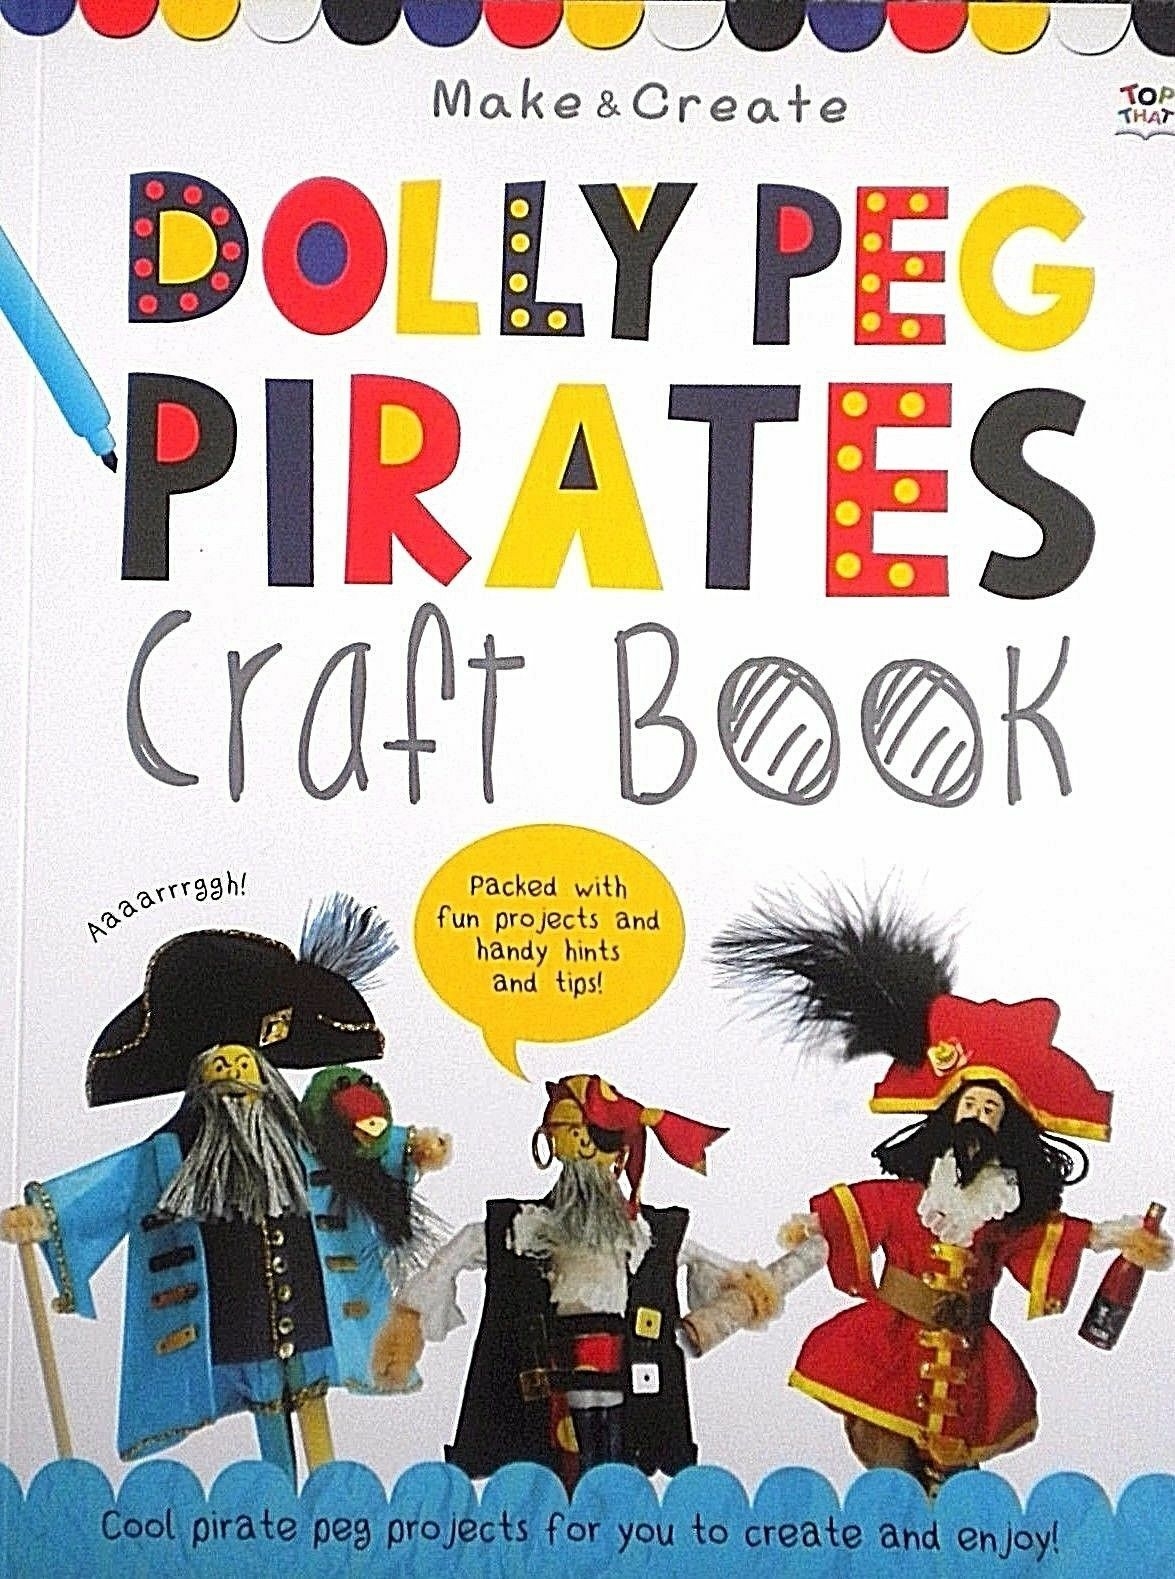 Make and Create: Dolly Peg Pirate Craft Kit